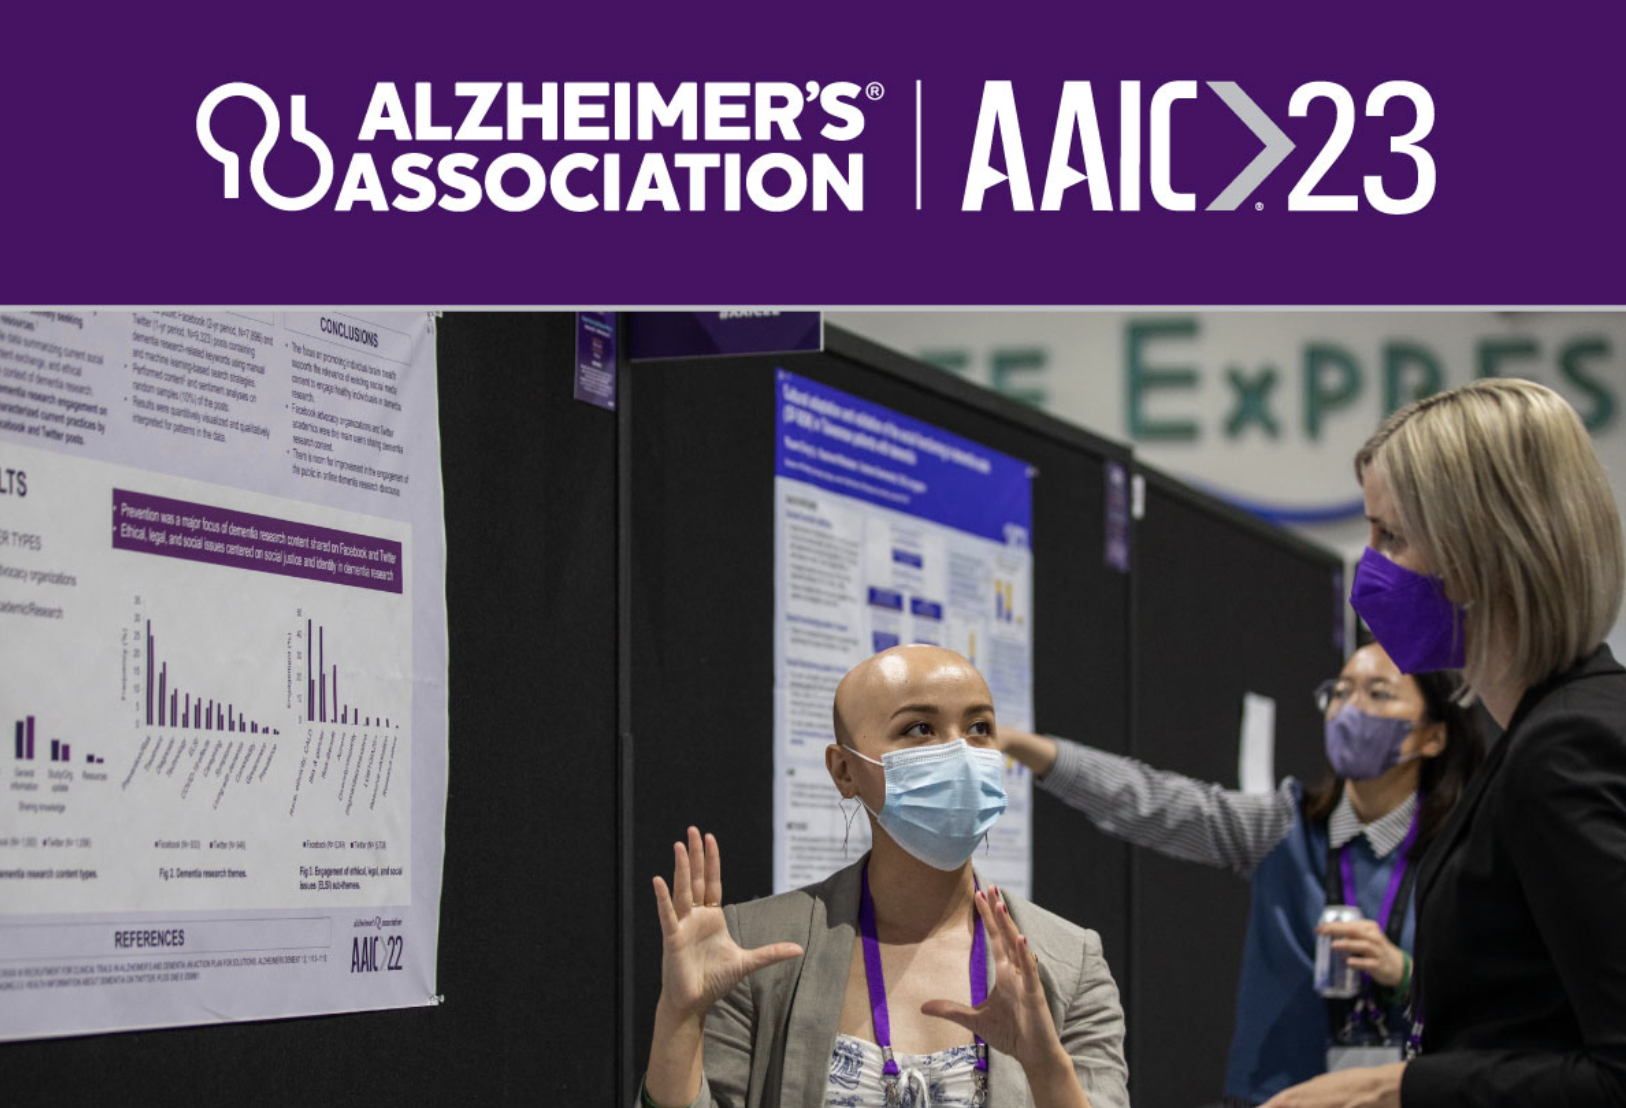 ATRI at the Alzheimer's Association International Conference (AAIC23)